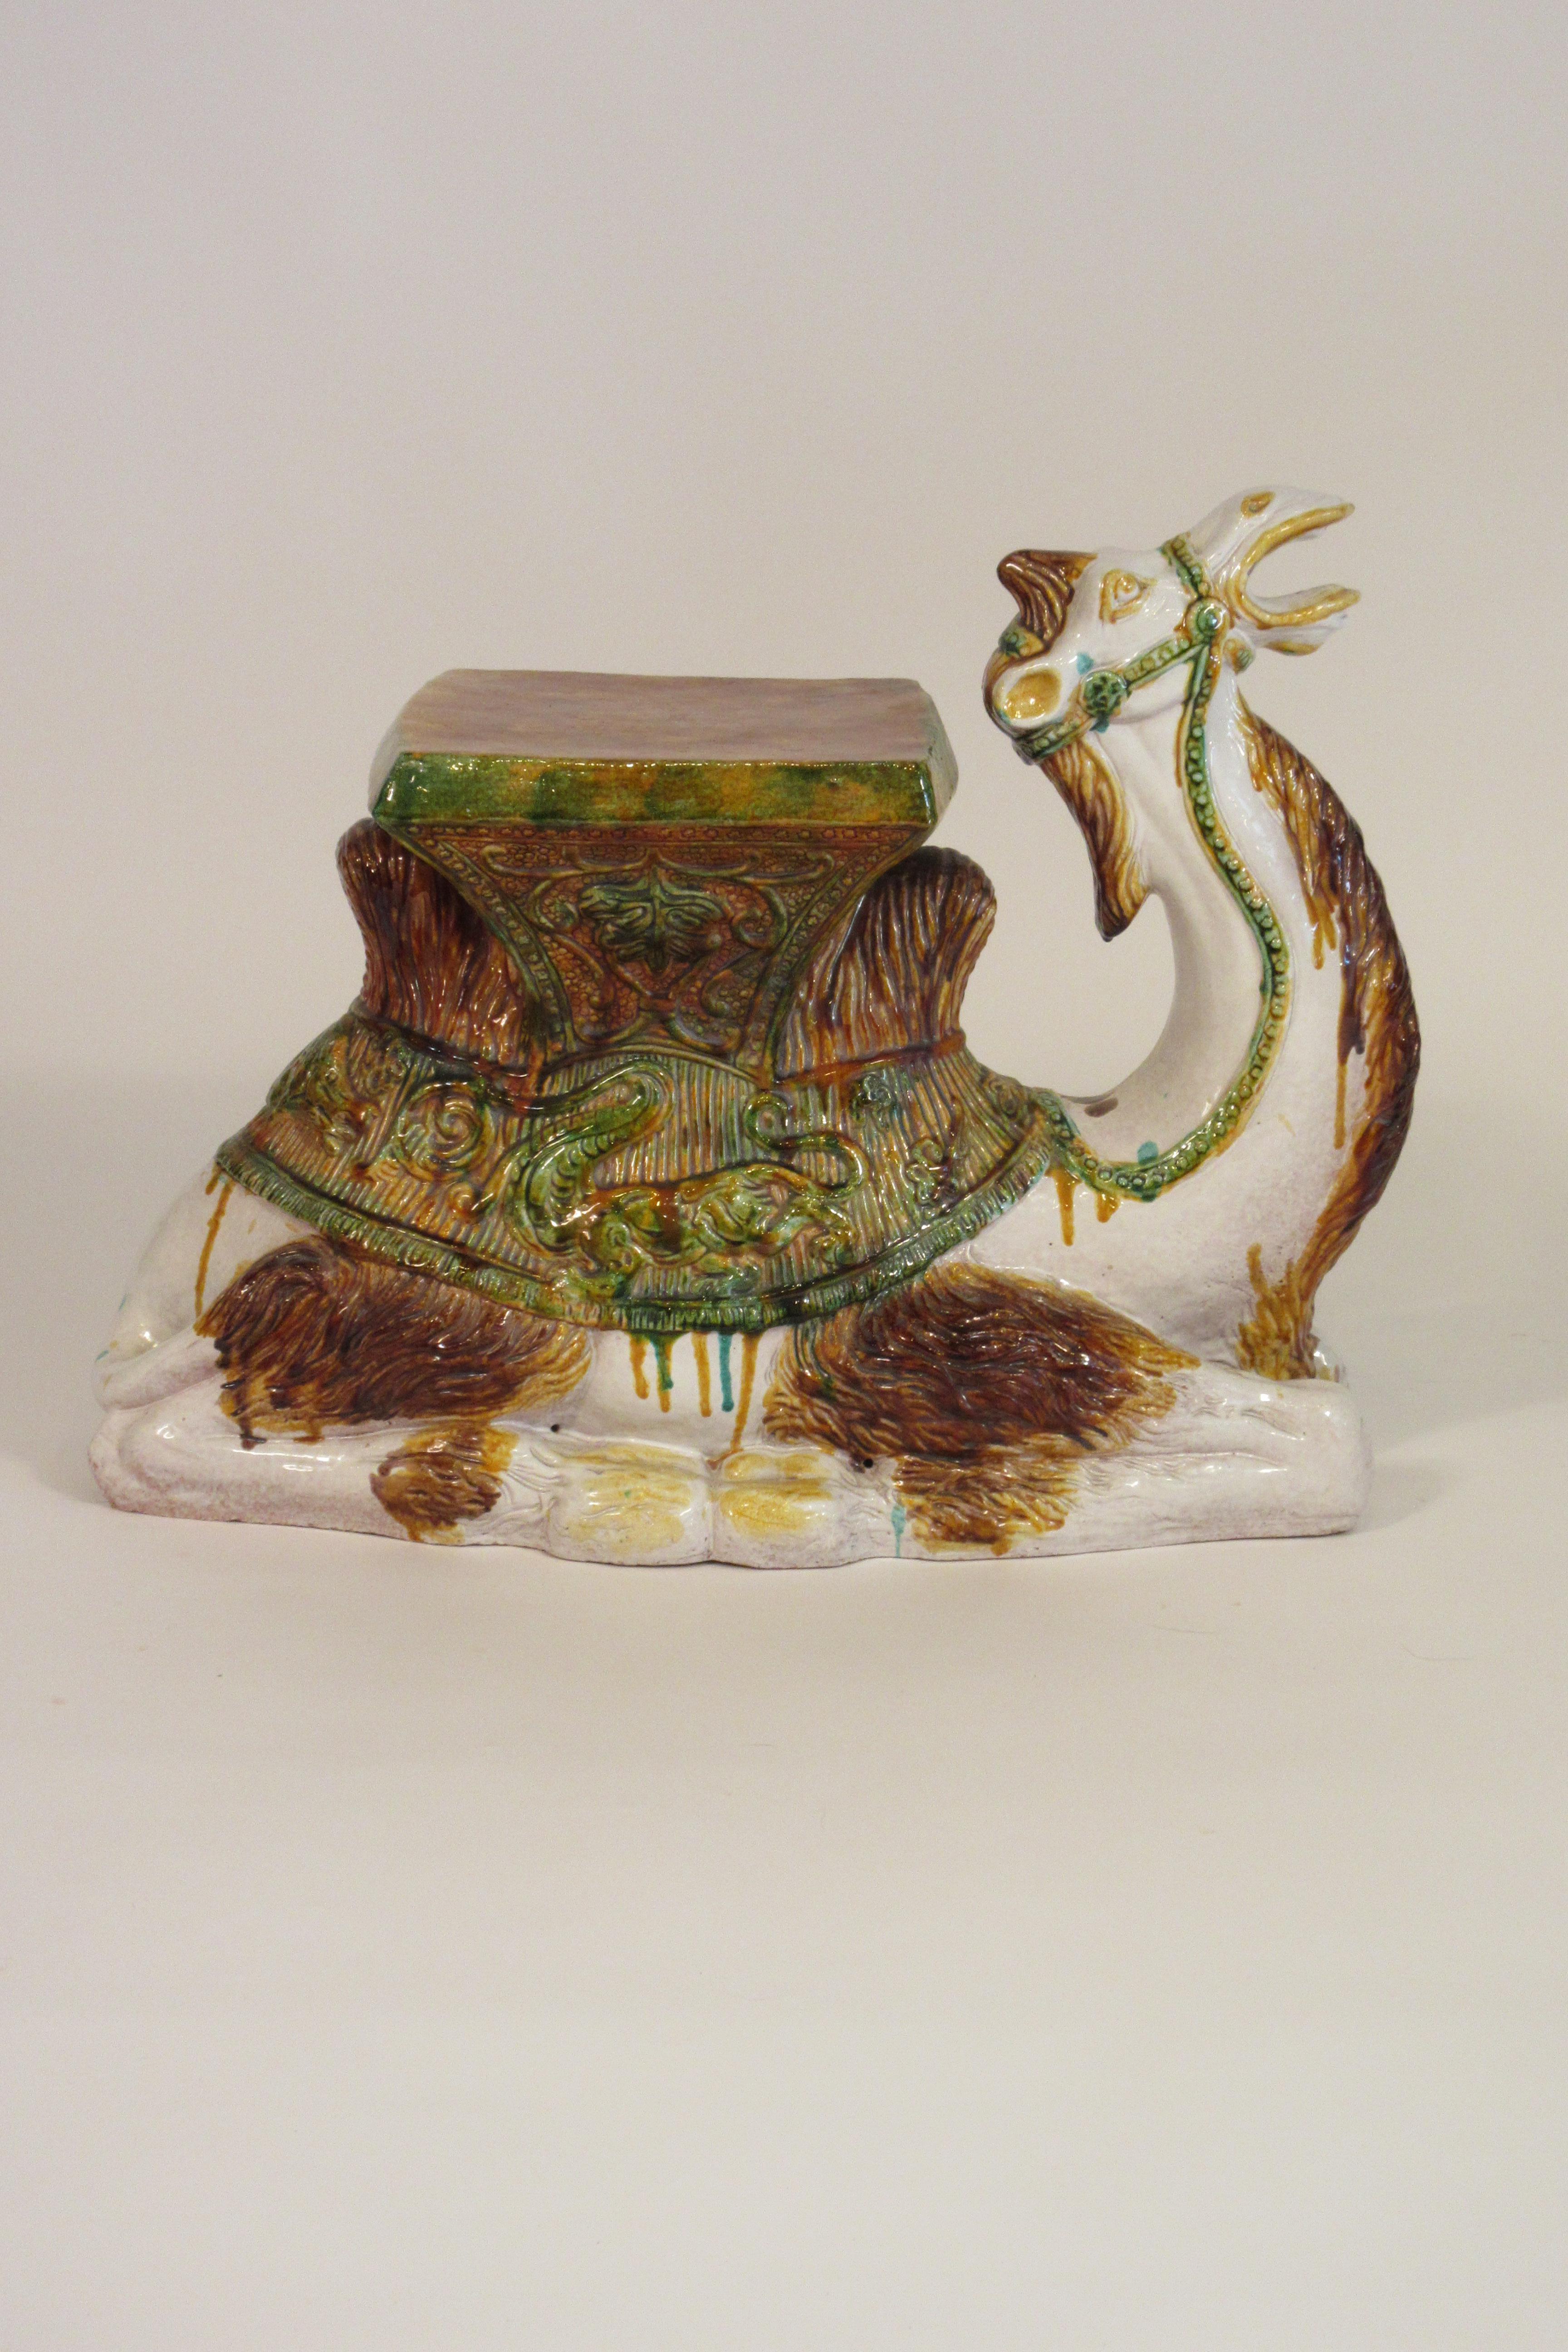 1960s hand-painted terracotta camel garden seat marked Italy.